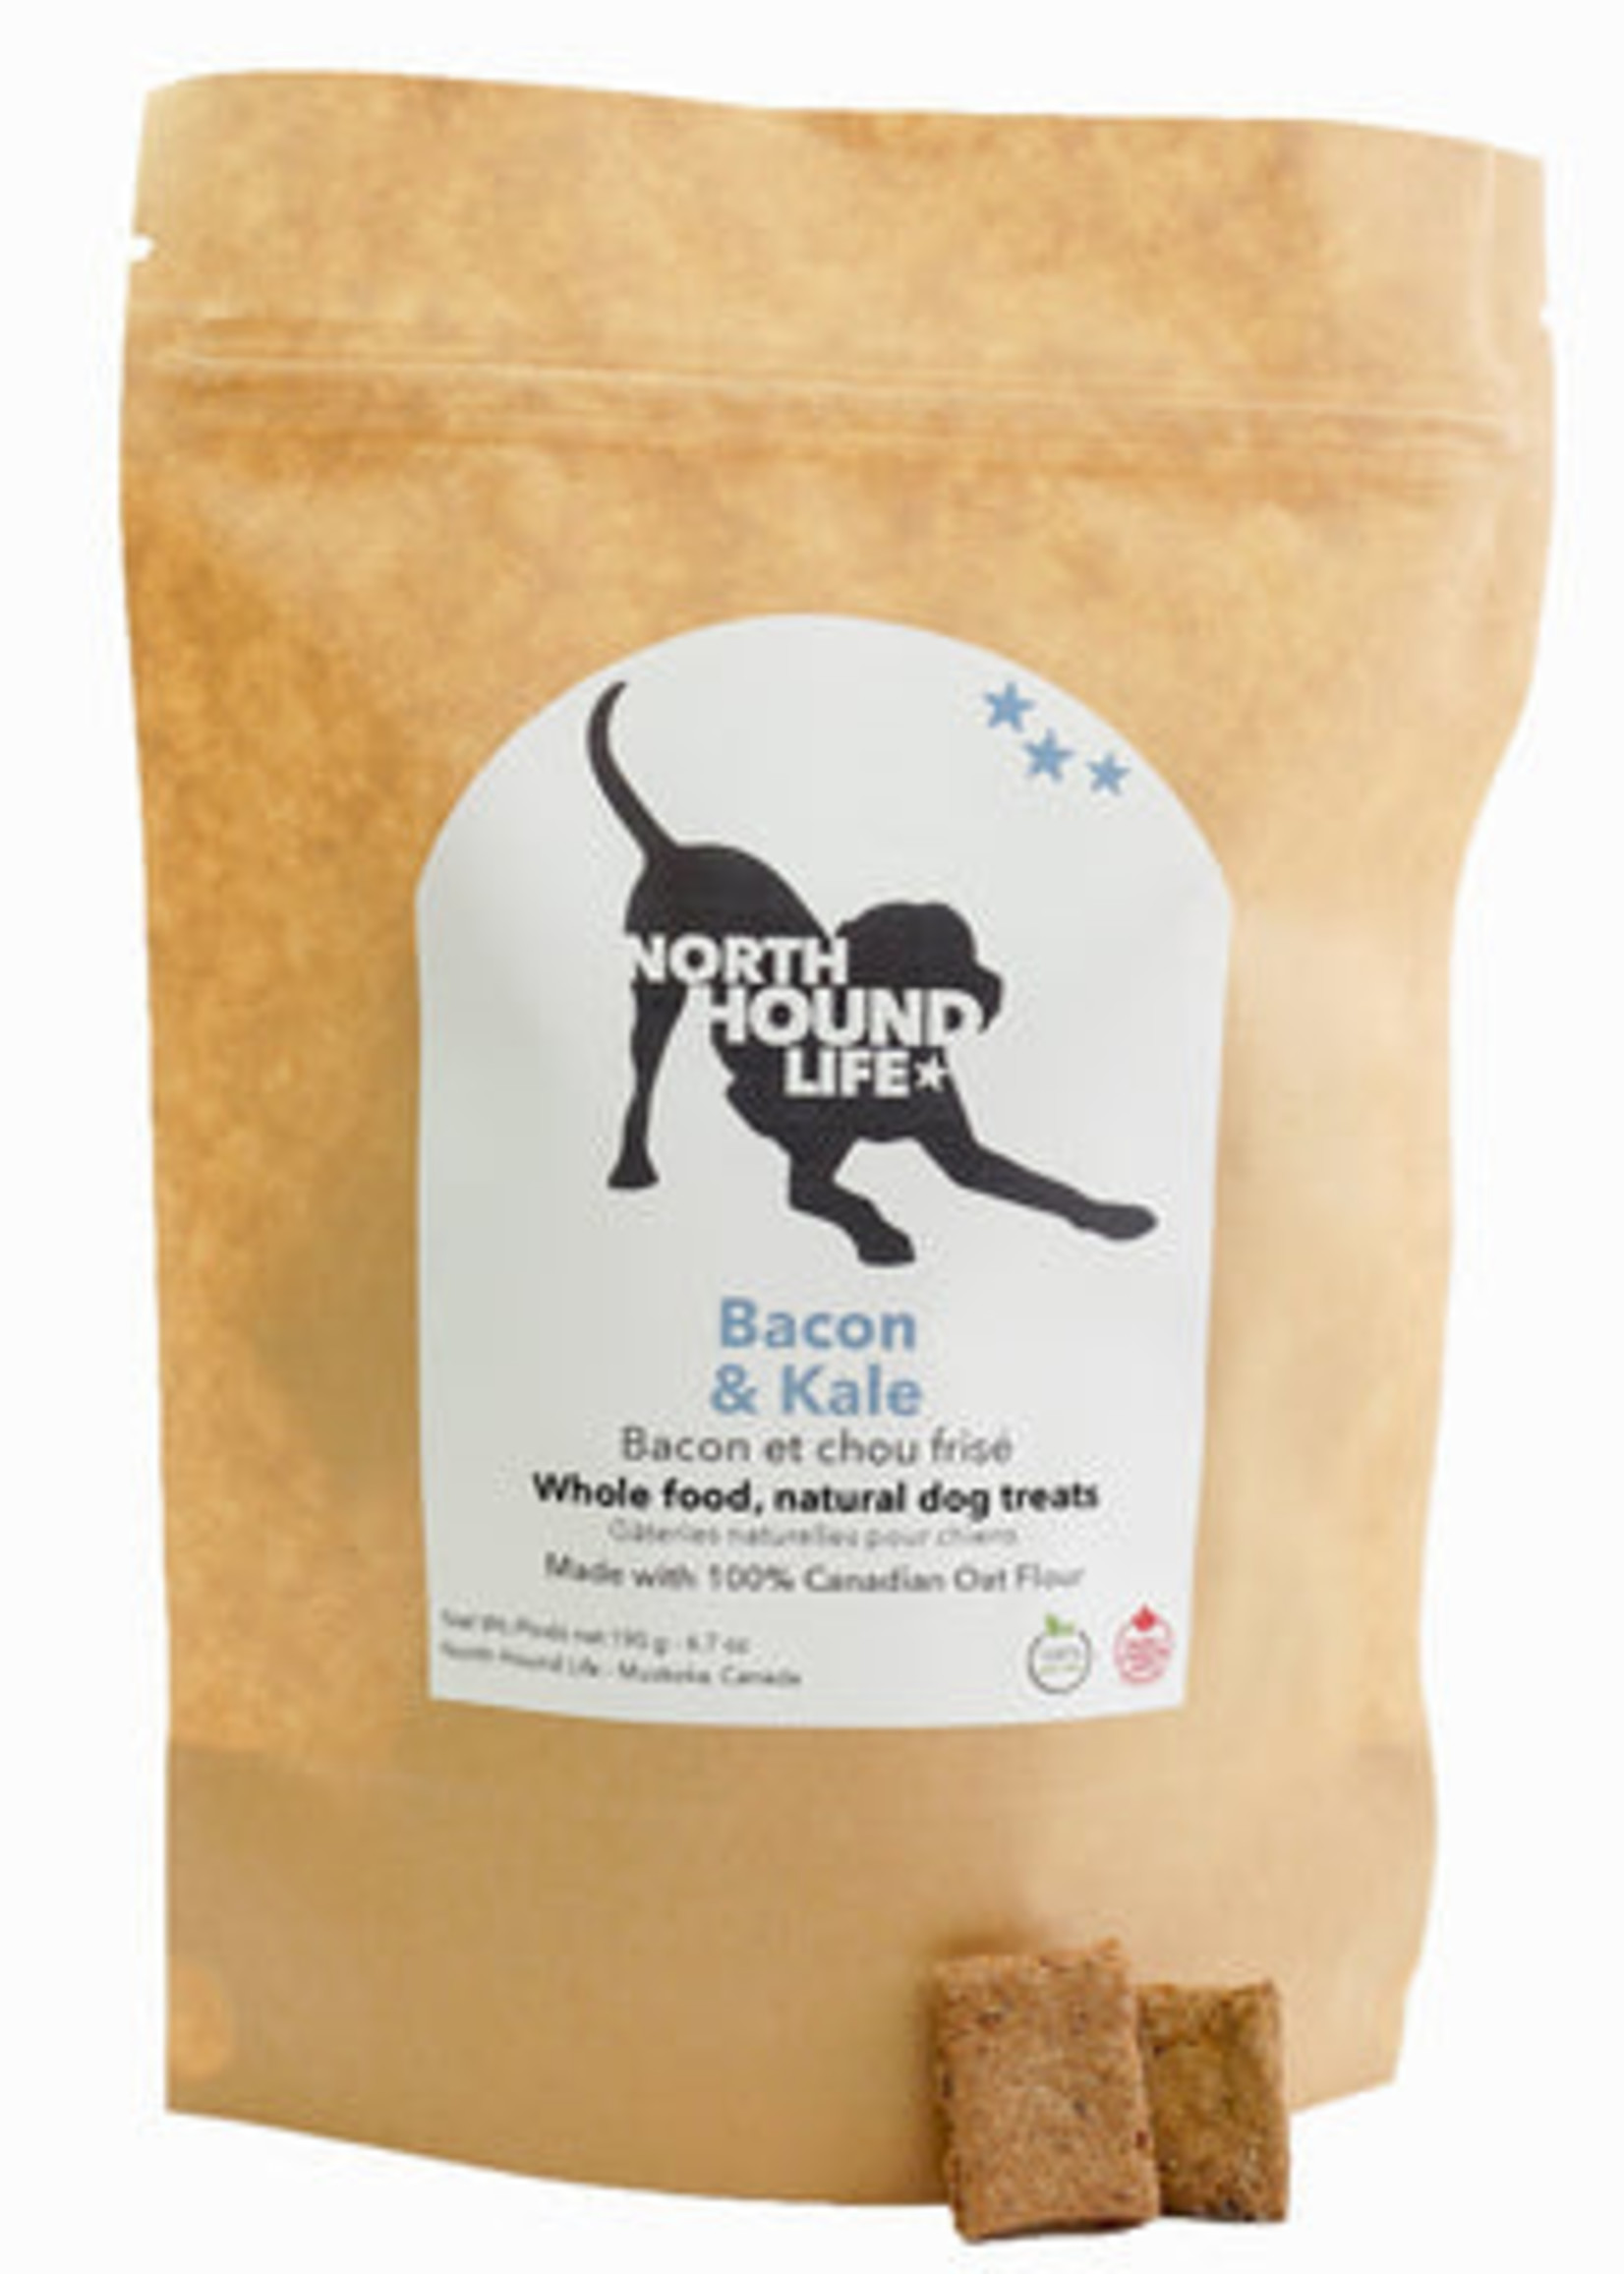 North Hound Life North Hound Life - Bacon & Kale Cookies